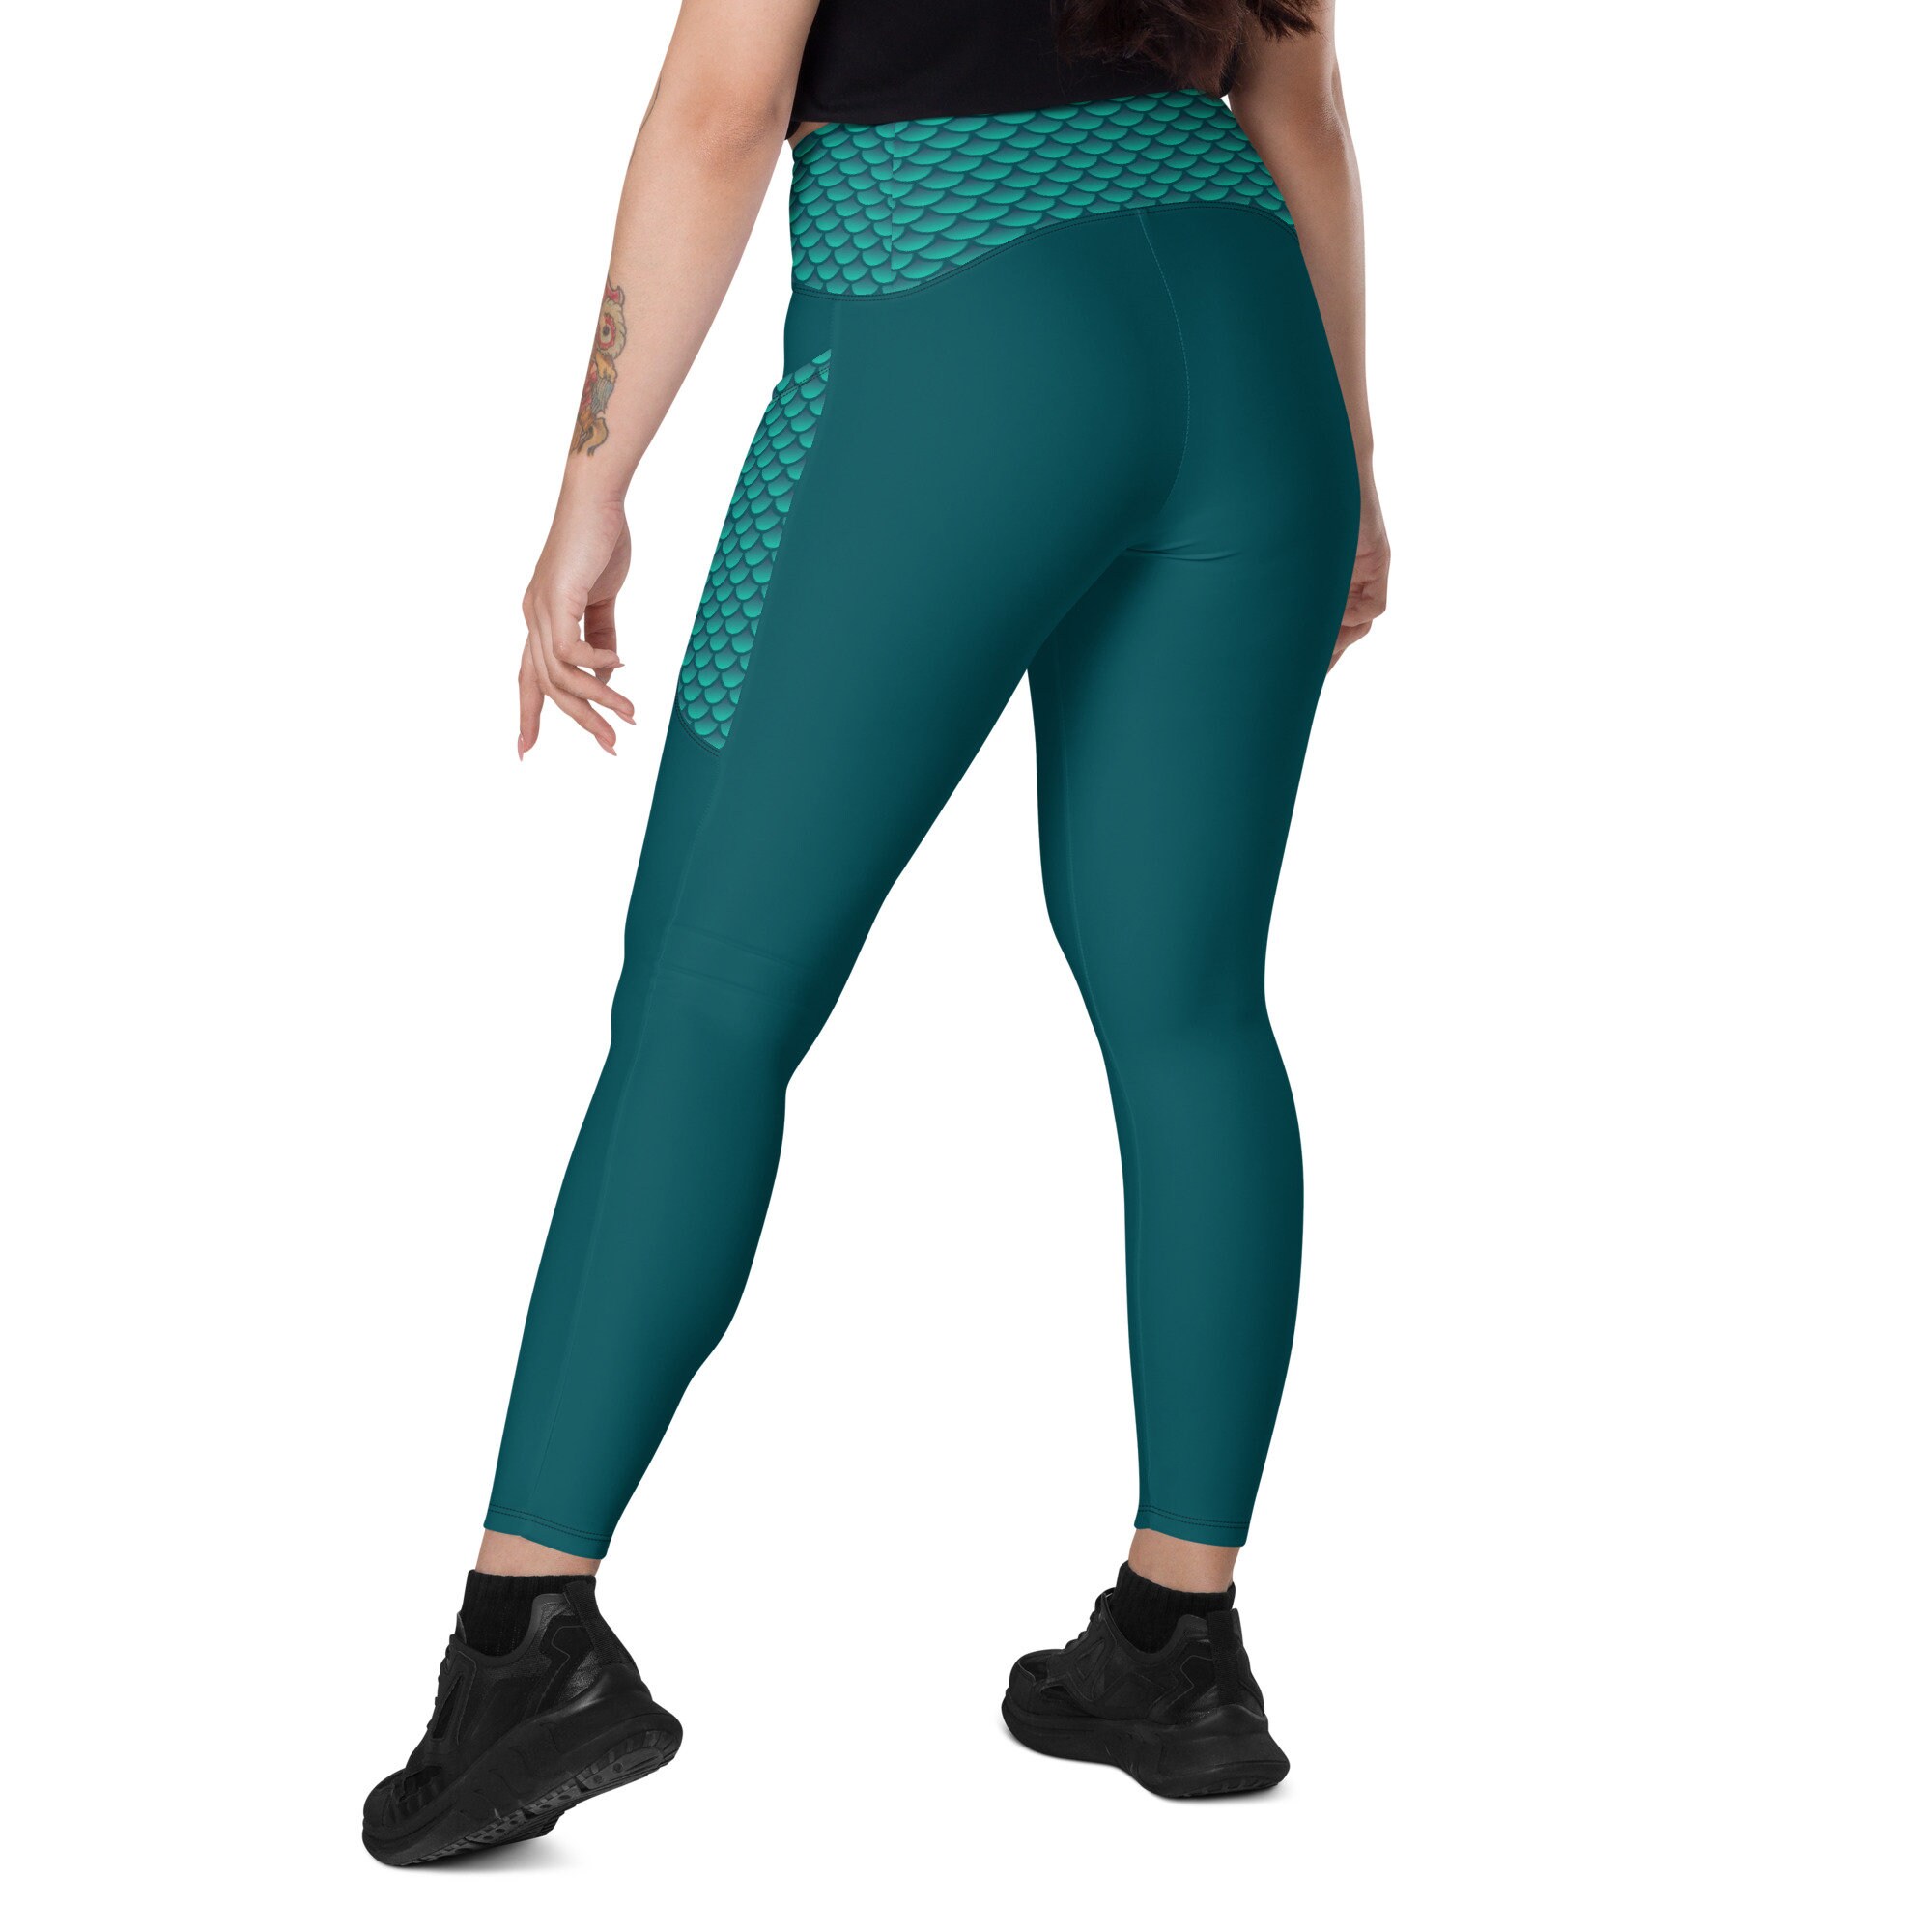 Blue/green Mermaid Scale Crossover Leggings with Pockets for Yoga, the Gym,  the Beach, or Just for Everyday Life 